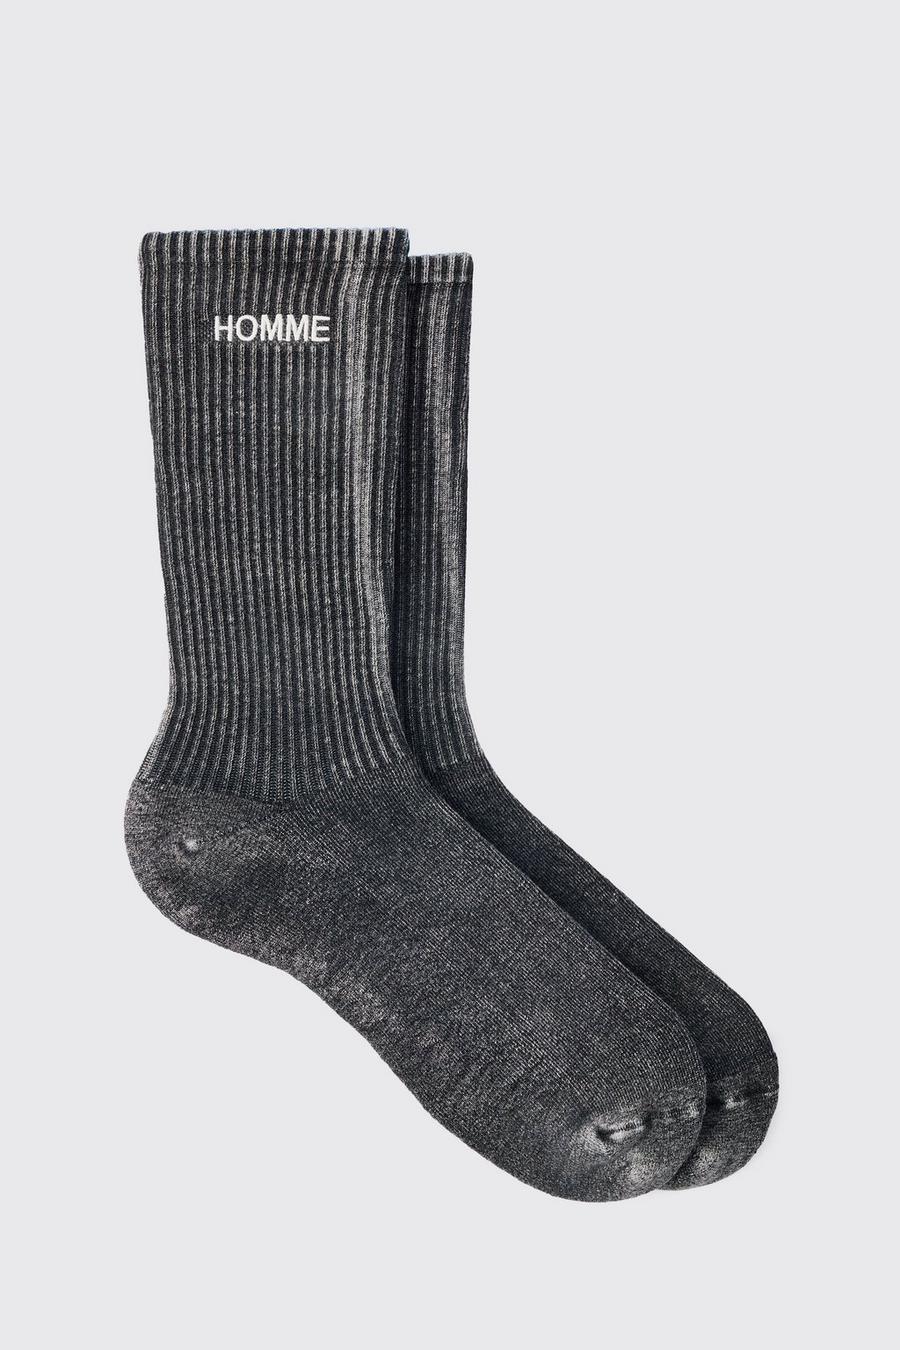 Calcetines grises sobreteñidos Homme, Grey image number 1